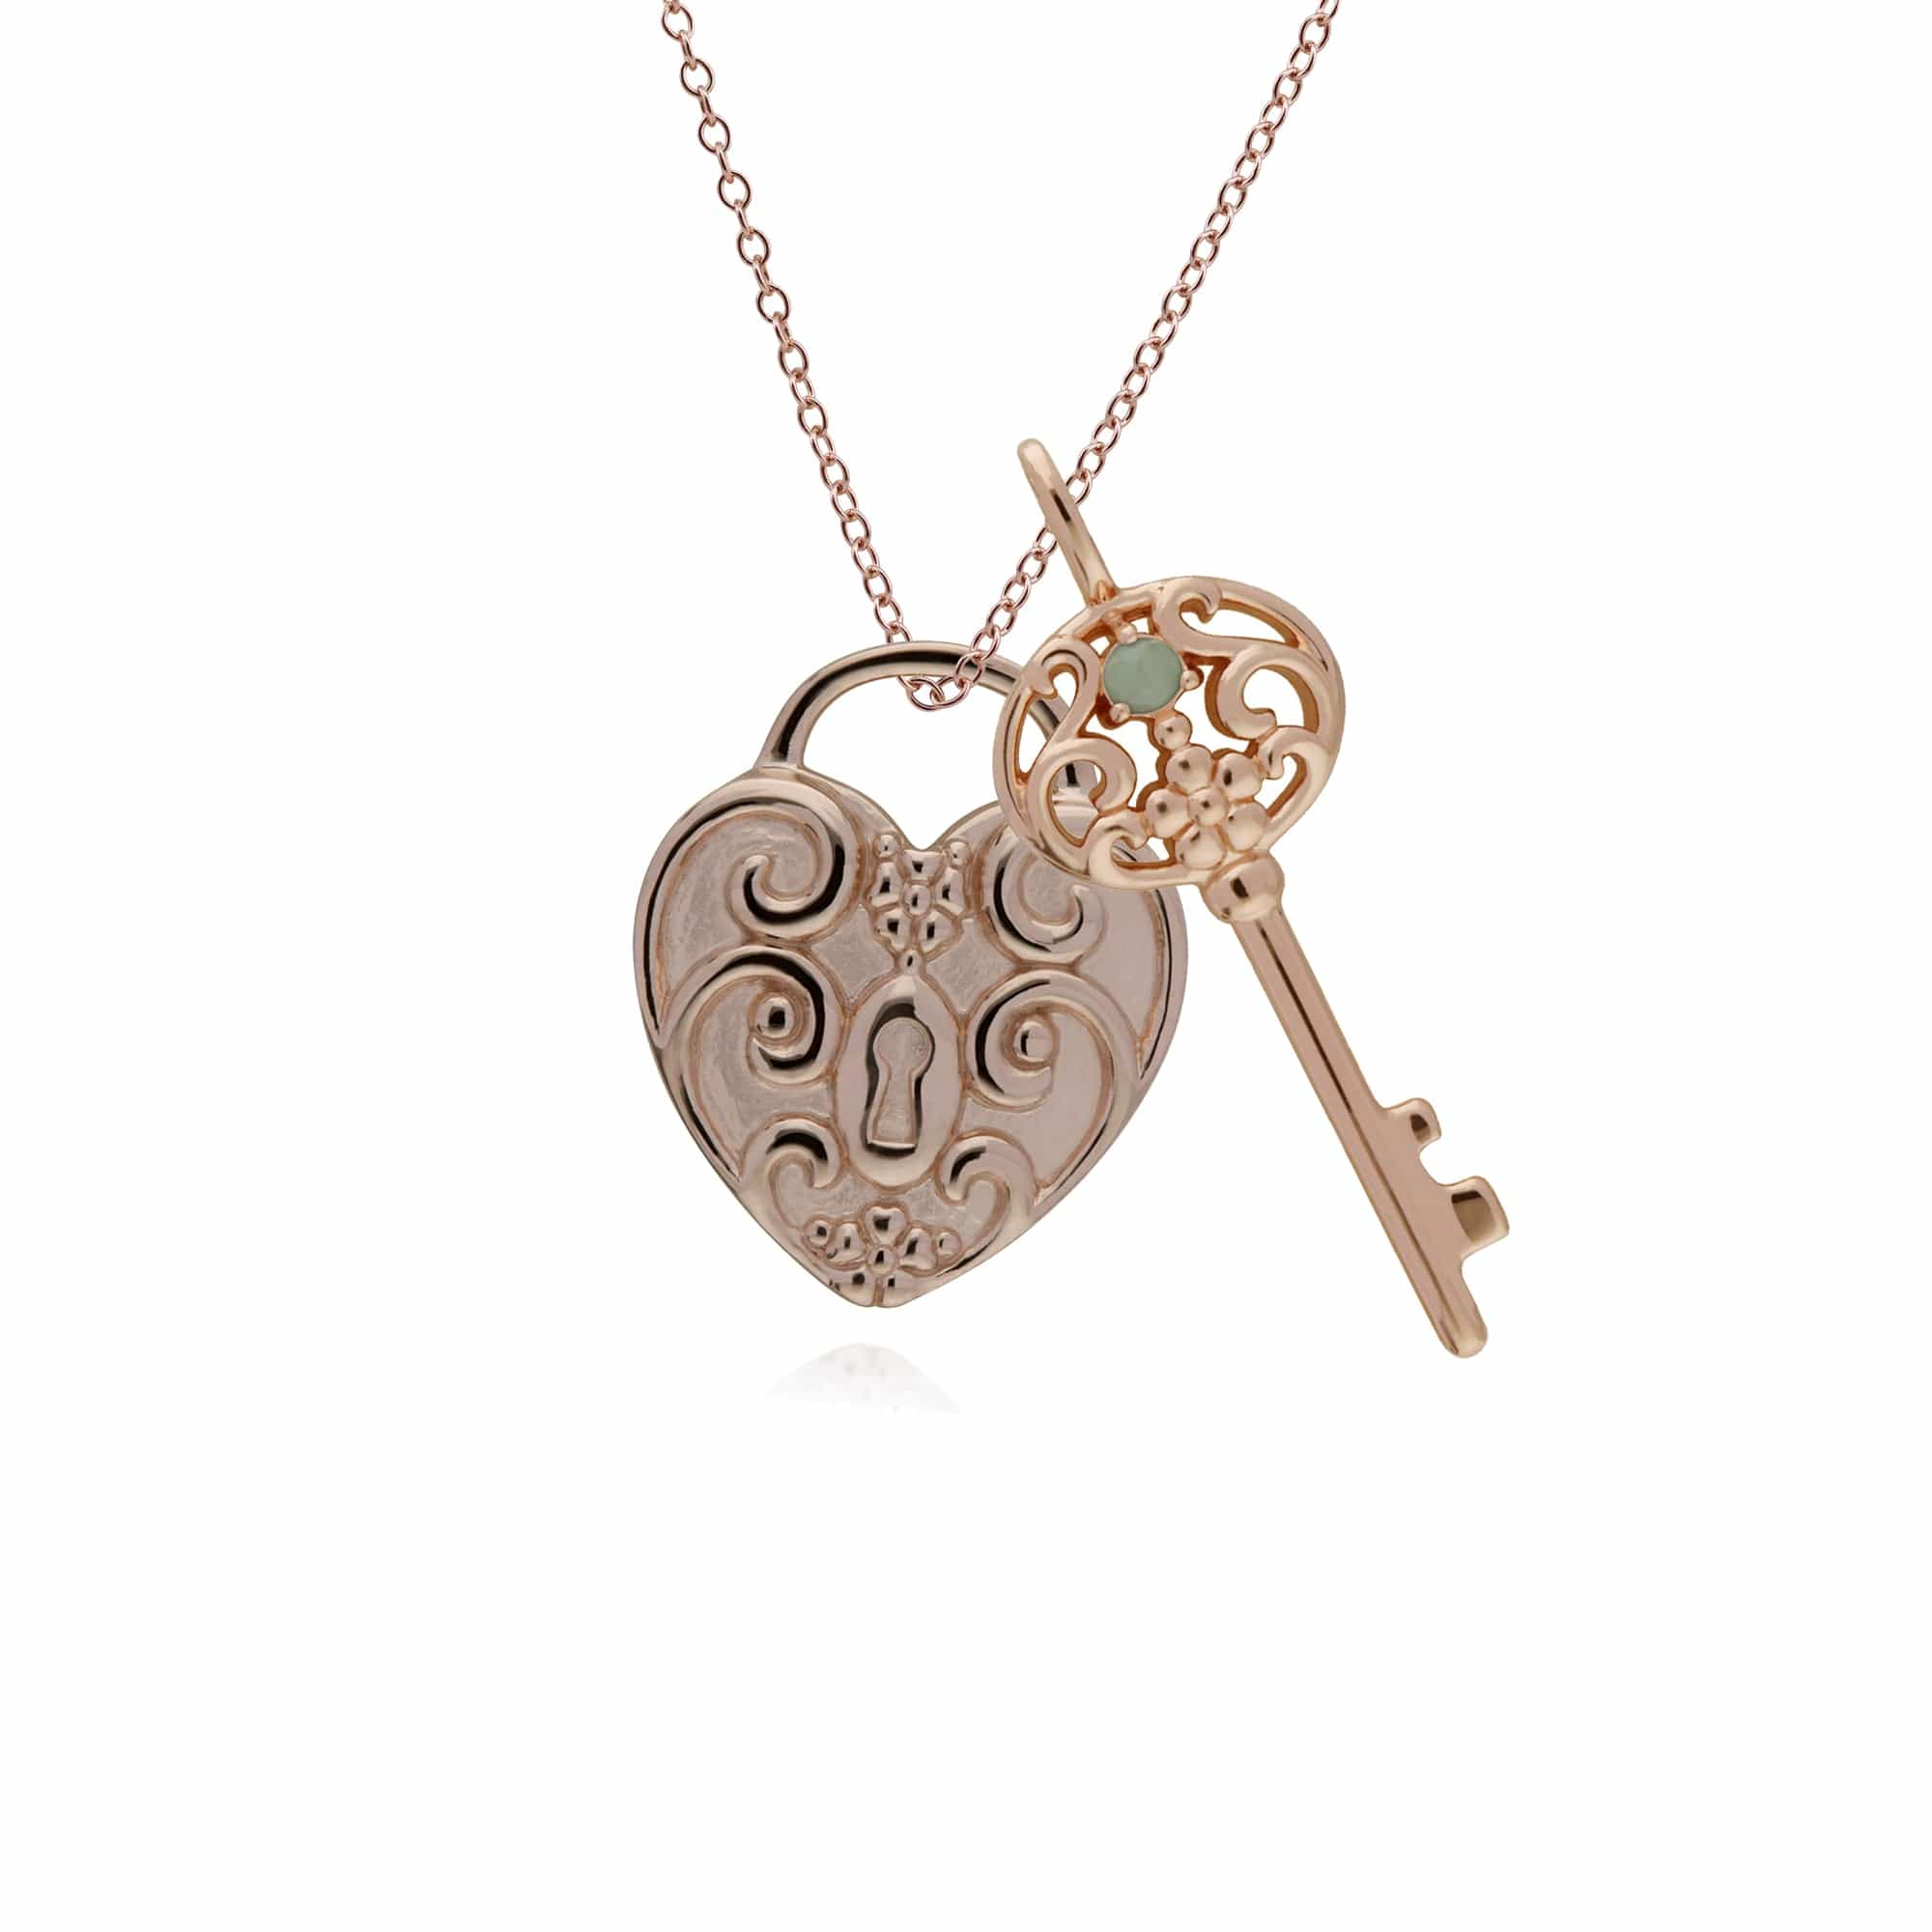 270P026712925-270P026501925 Classic Swirl Heart Lock Pendant & Jade Big Key Charm in Rose Gold Plated 925 Sterling Silver 1